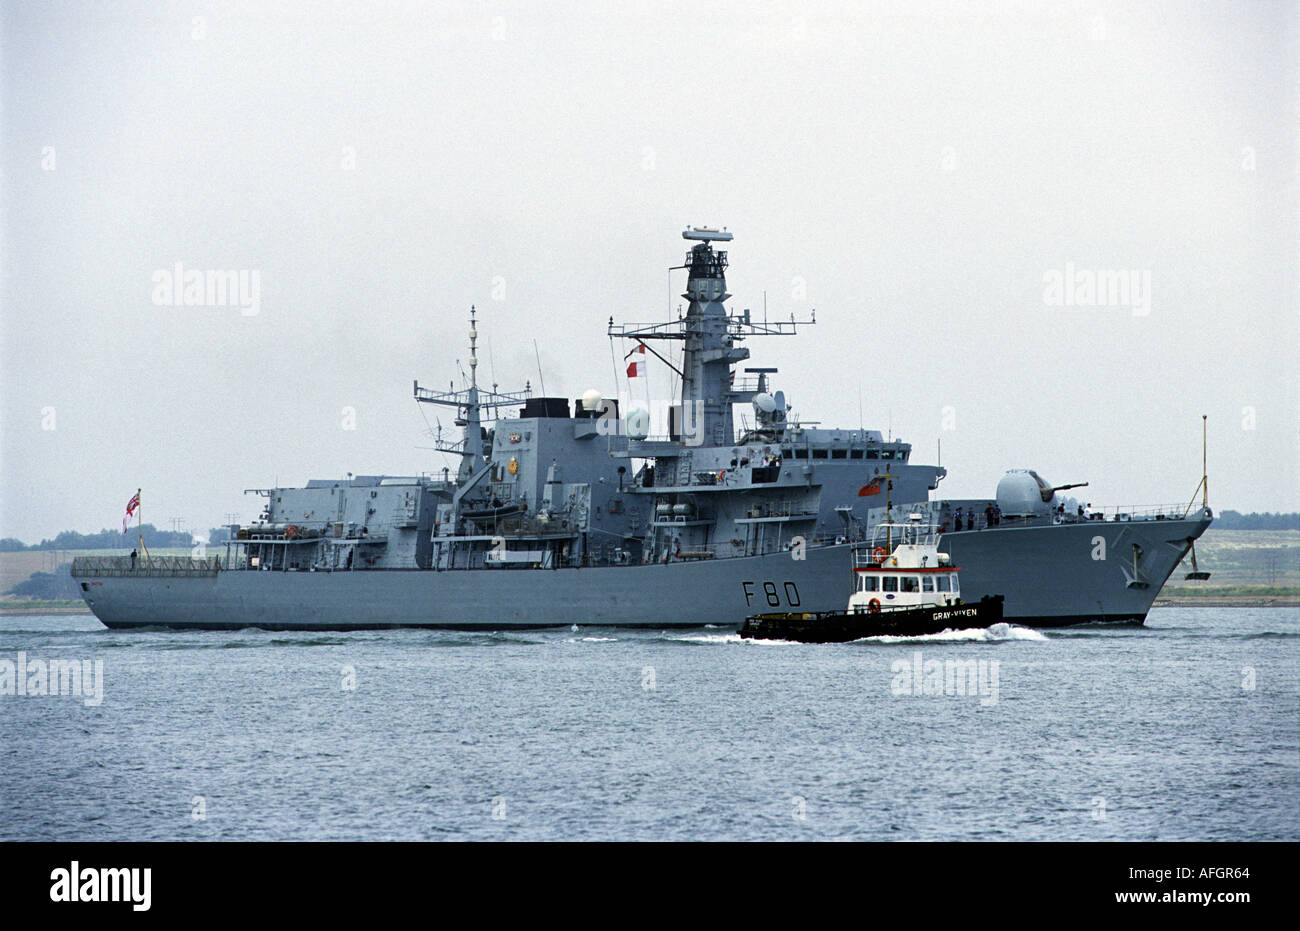 HMS Grafton (Almirante Lynch FF-07 Chilean Navy) sailing on the River Orwell towards the port of Ipswich, Suffolk, UK. Stock Photo